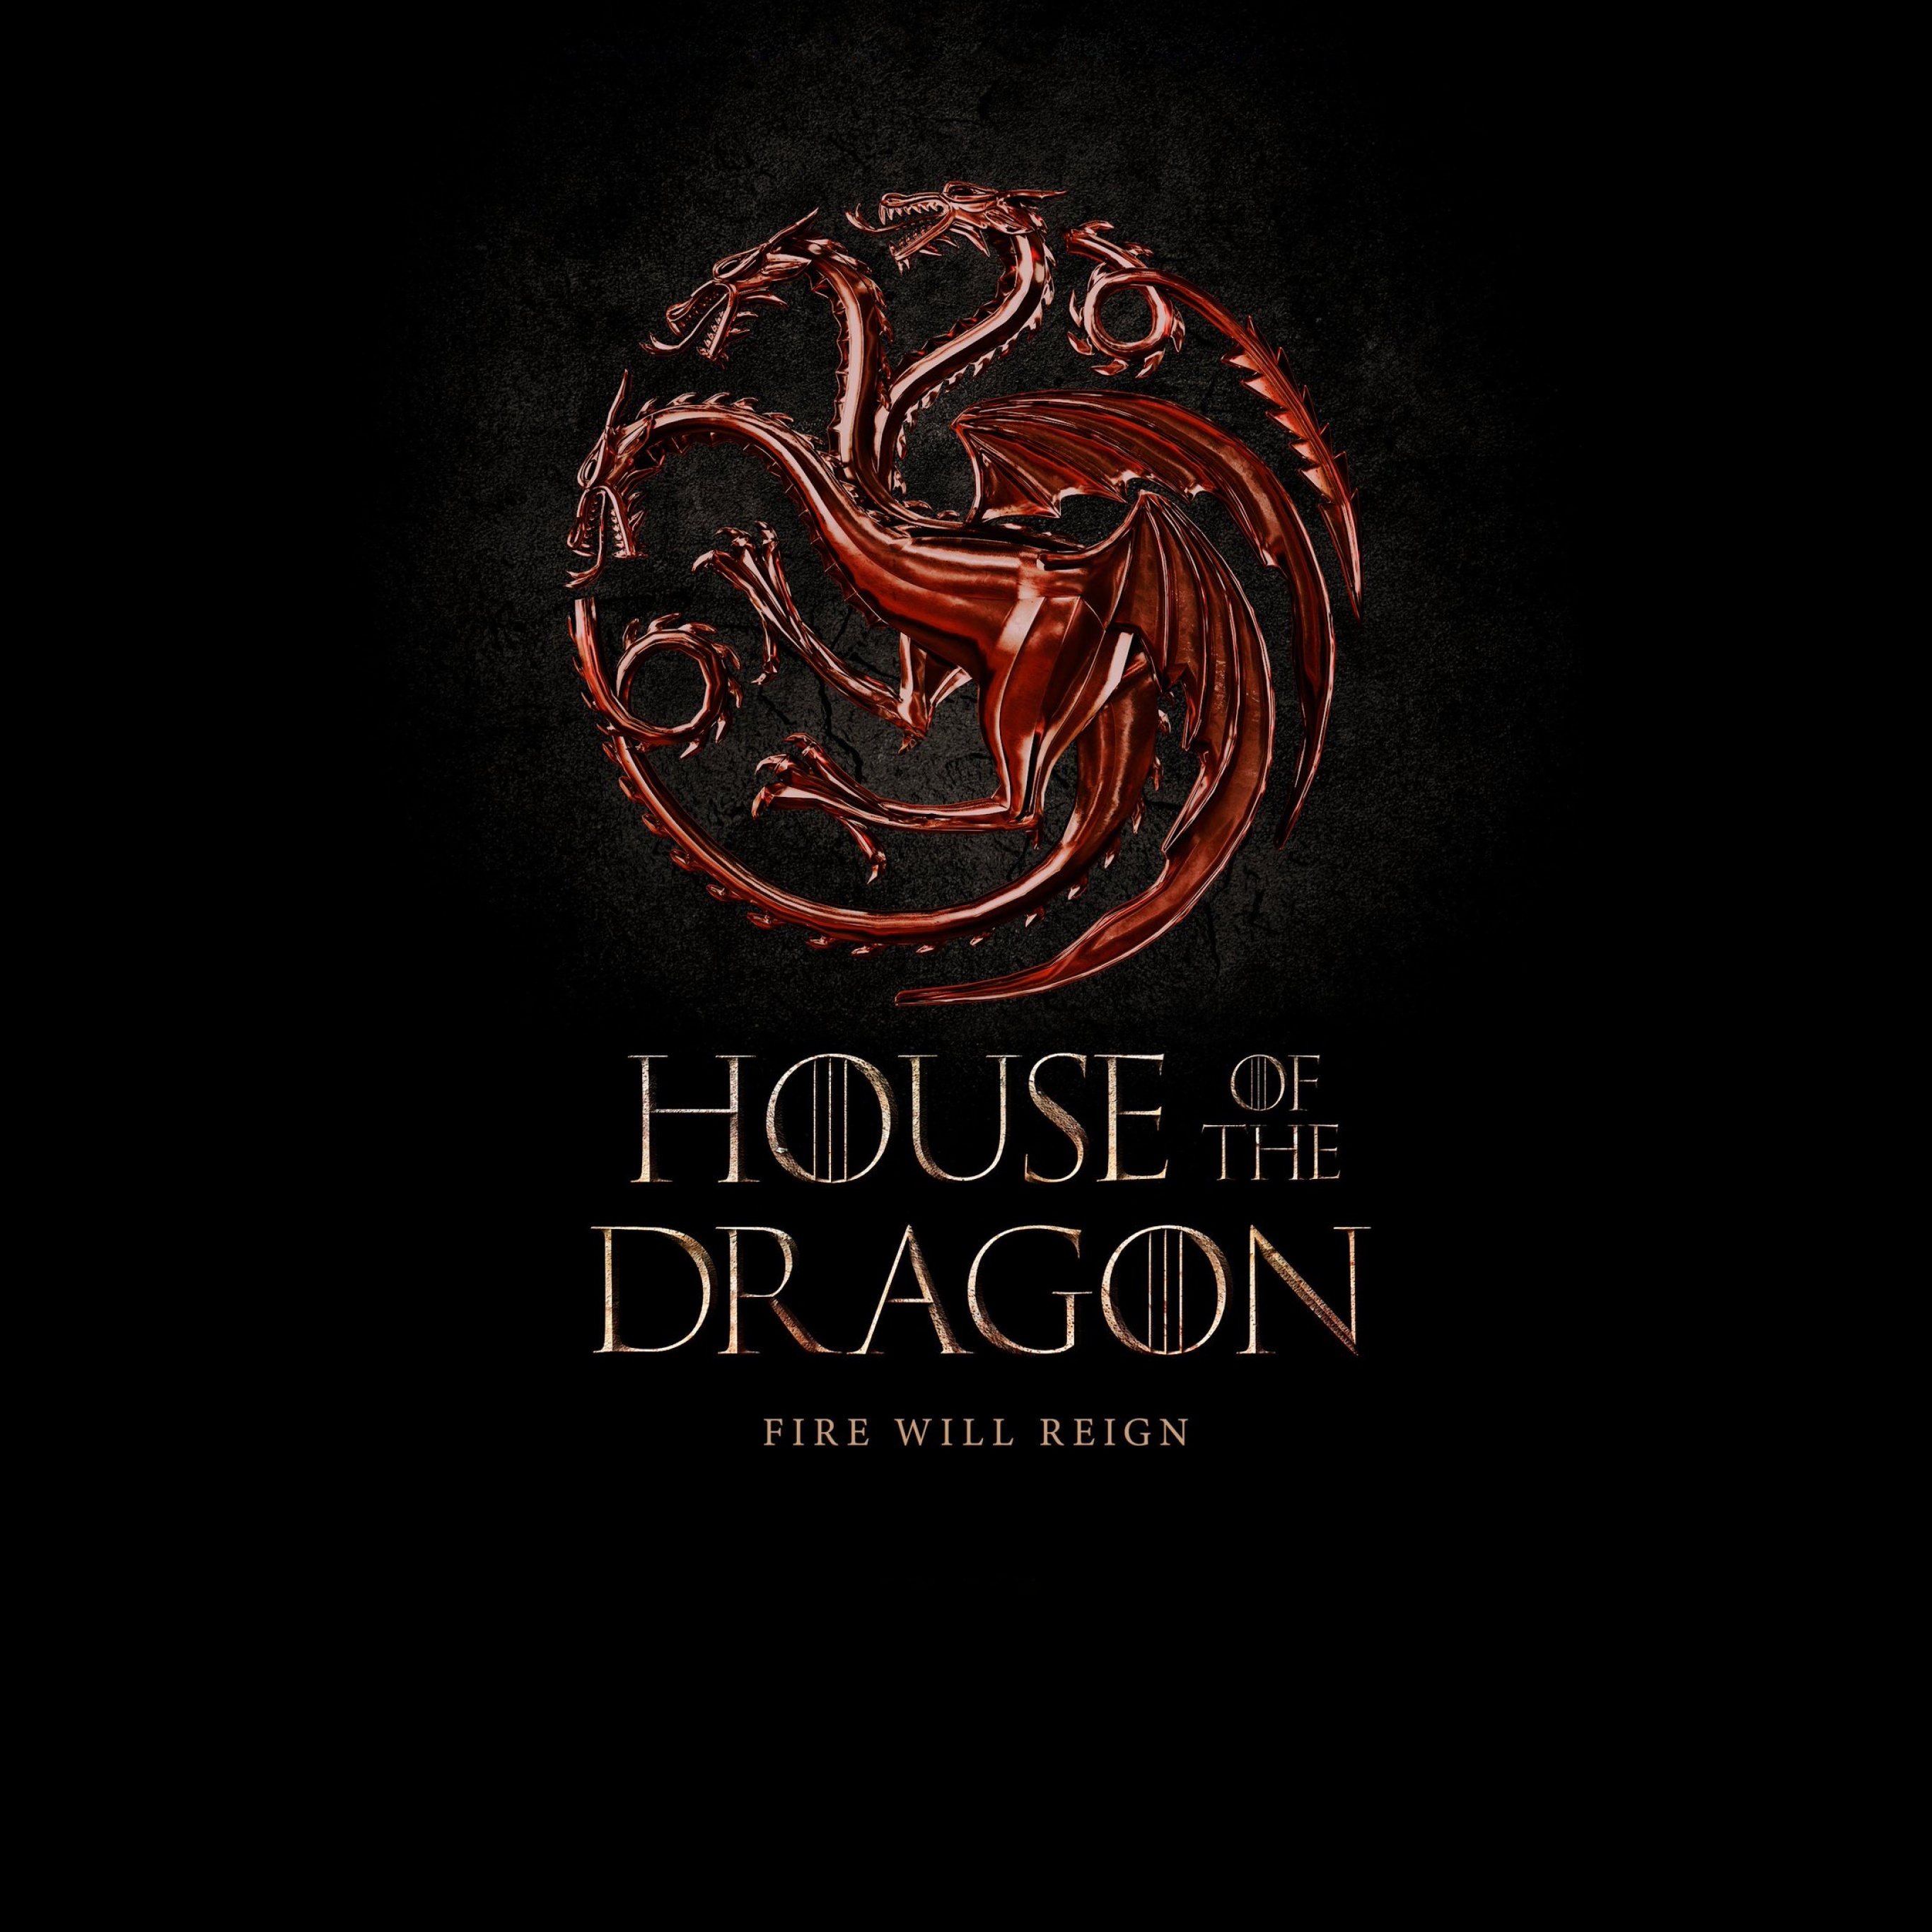 House of the Dragon Wallpaper 4K, Game of Thrones, HBO series